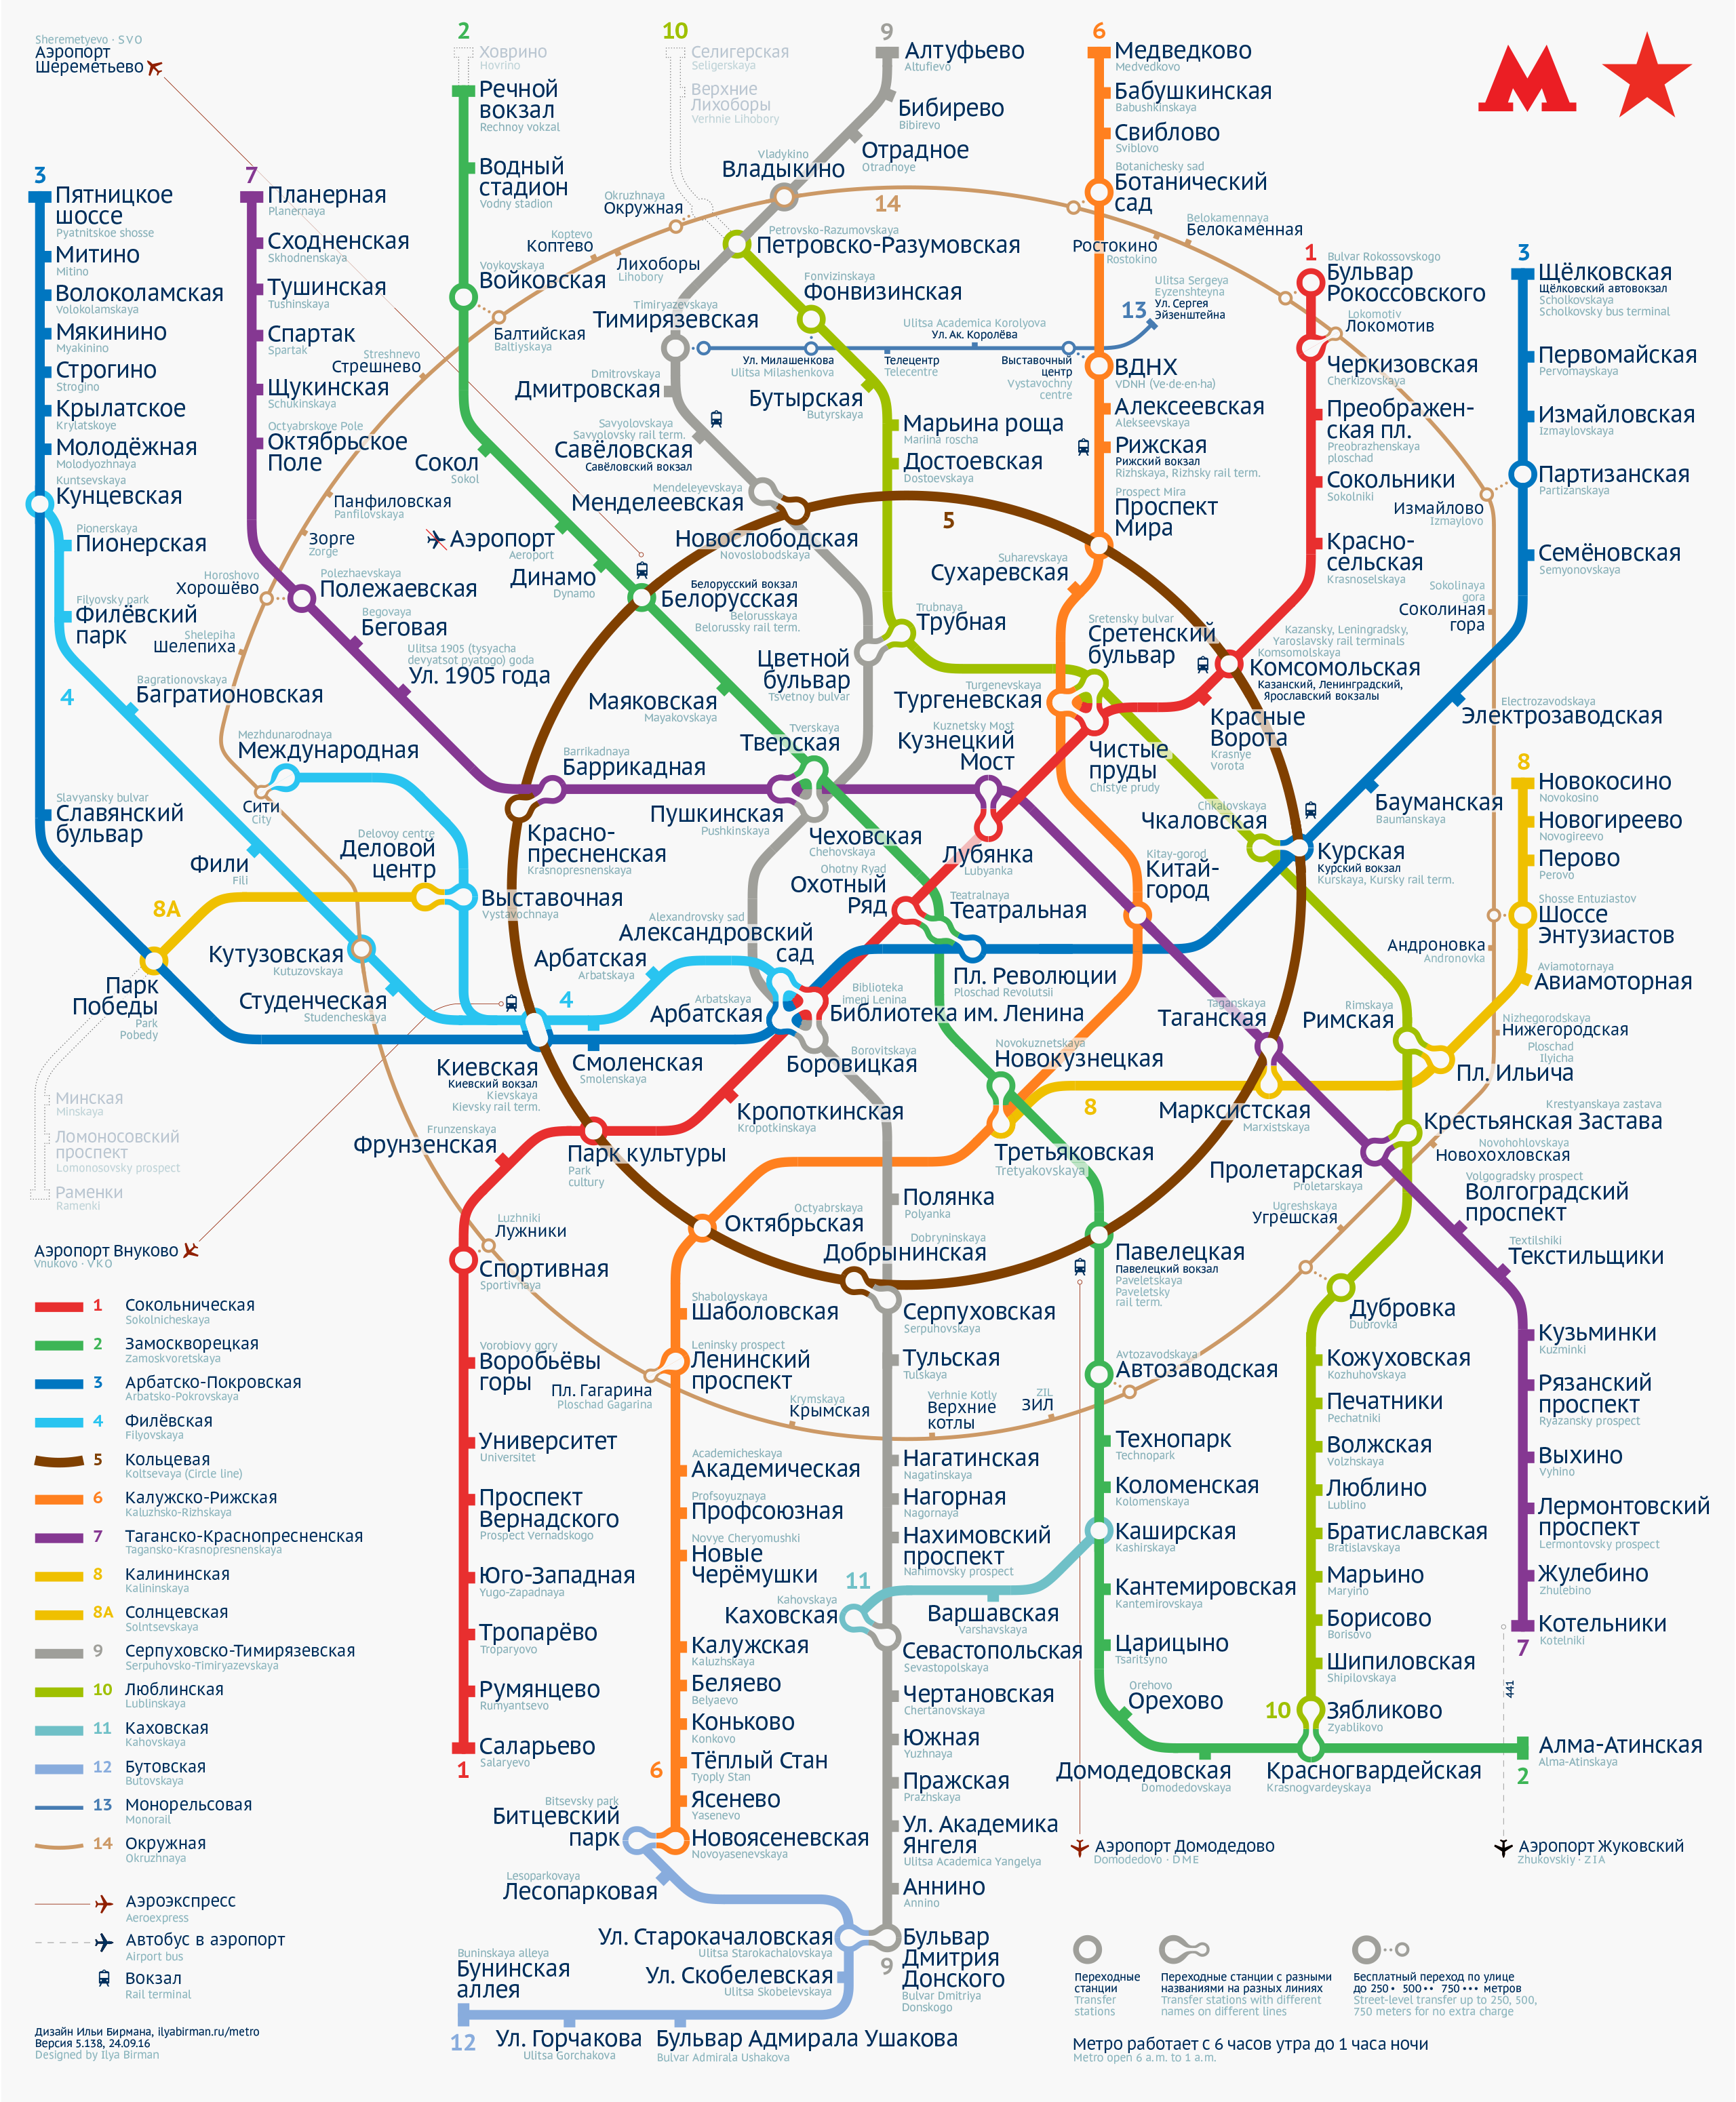 Moscow Metro – a bit of a challenge but we cracked it and it’s full of Stalinist art